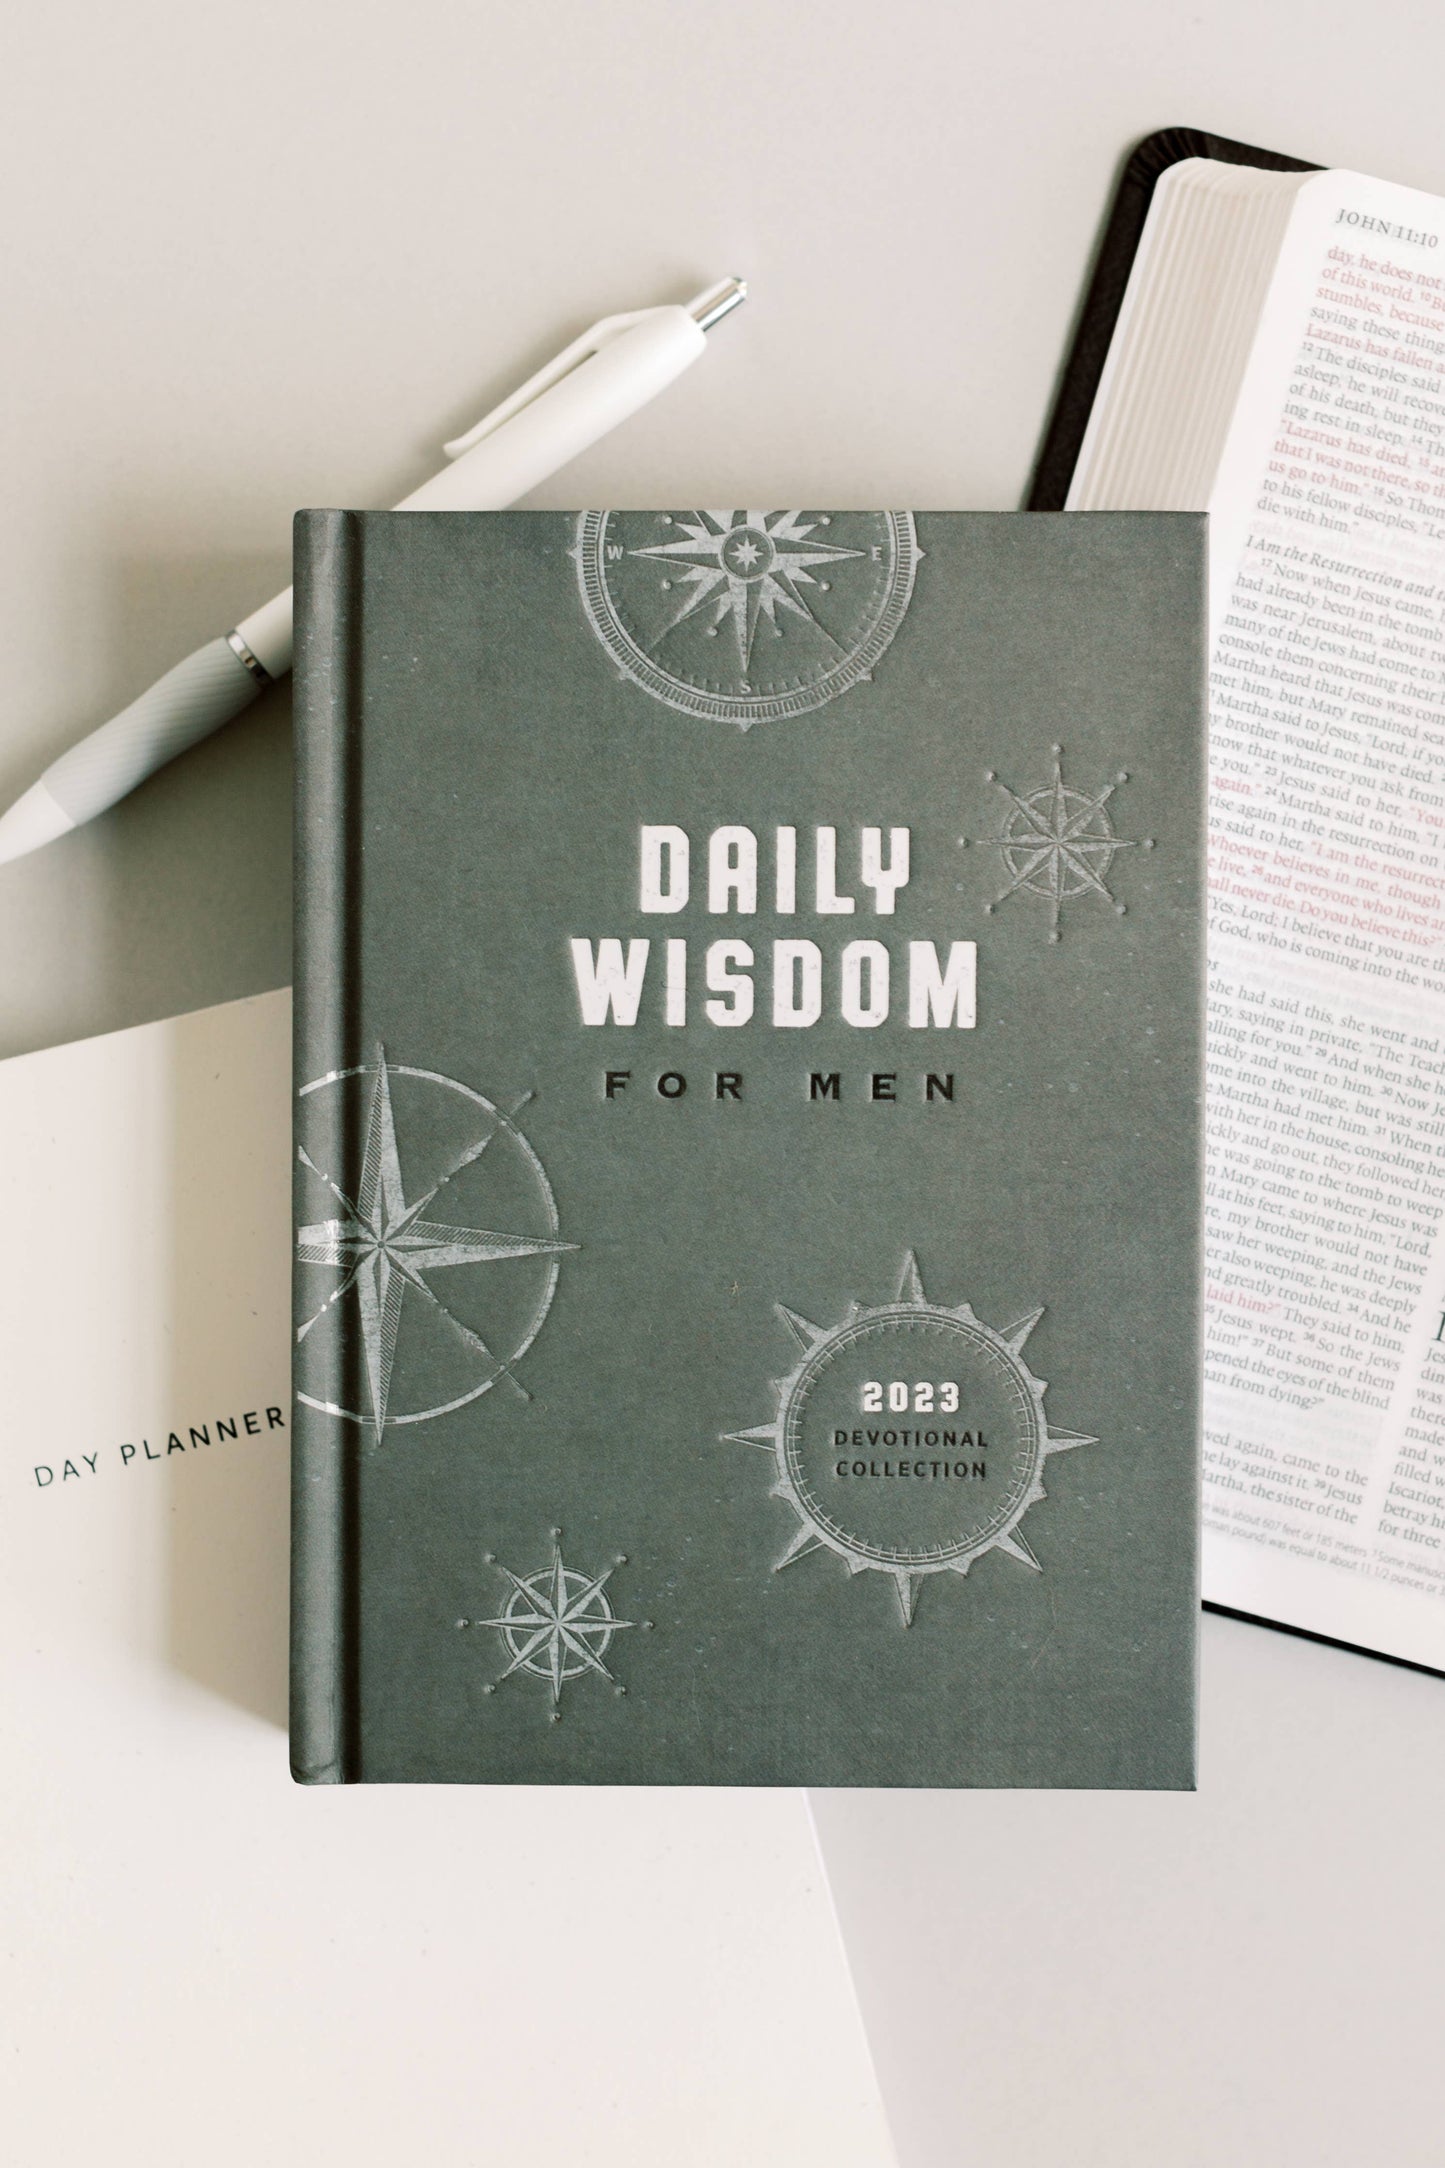 Daily Wisdom for Men 2023 Devotional Collection Book